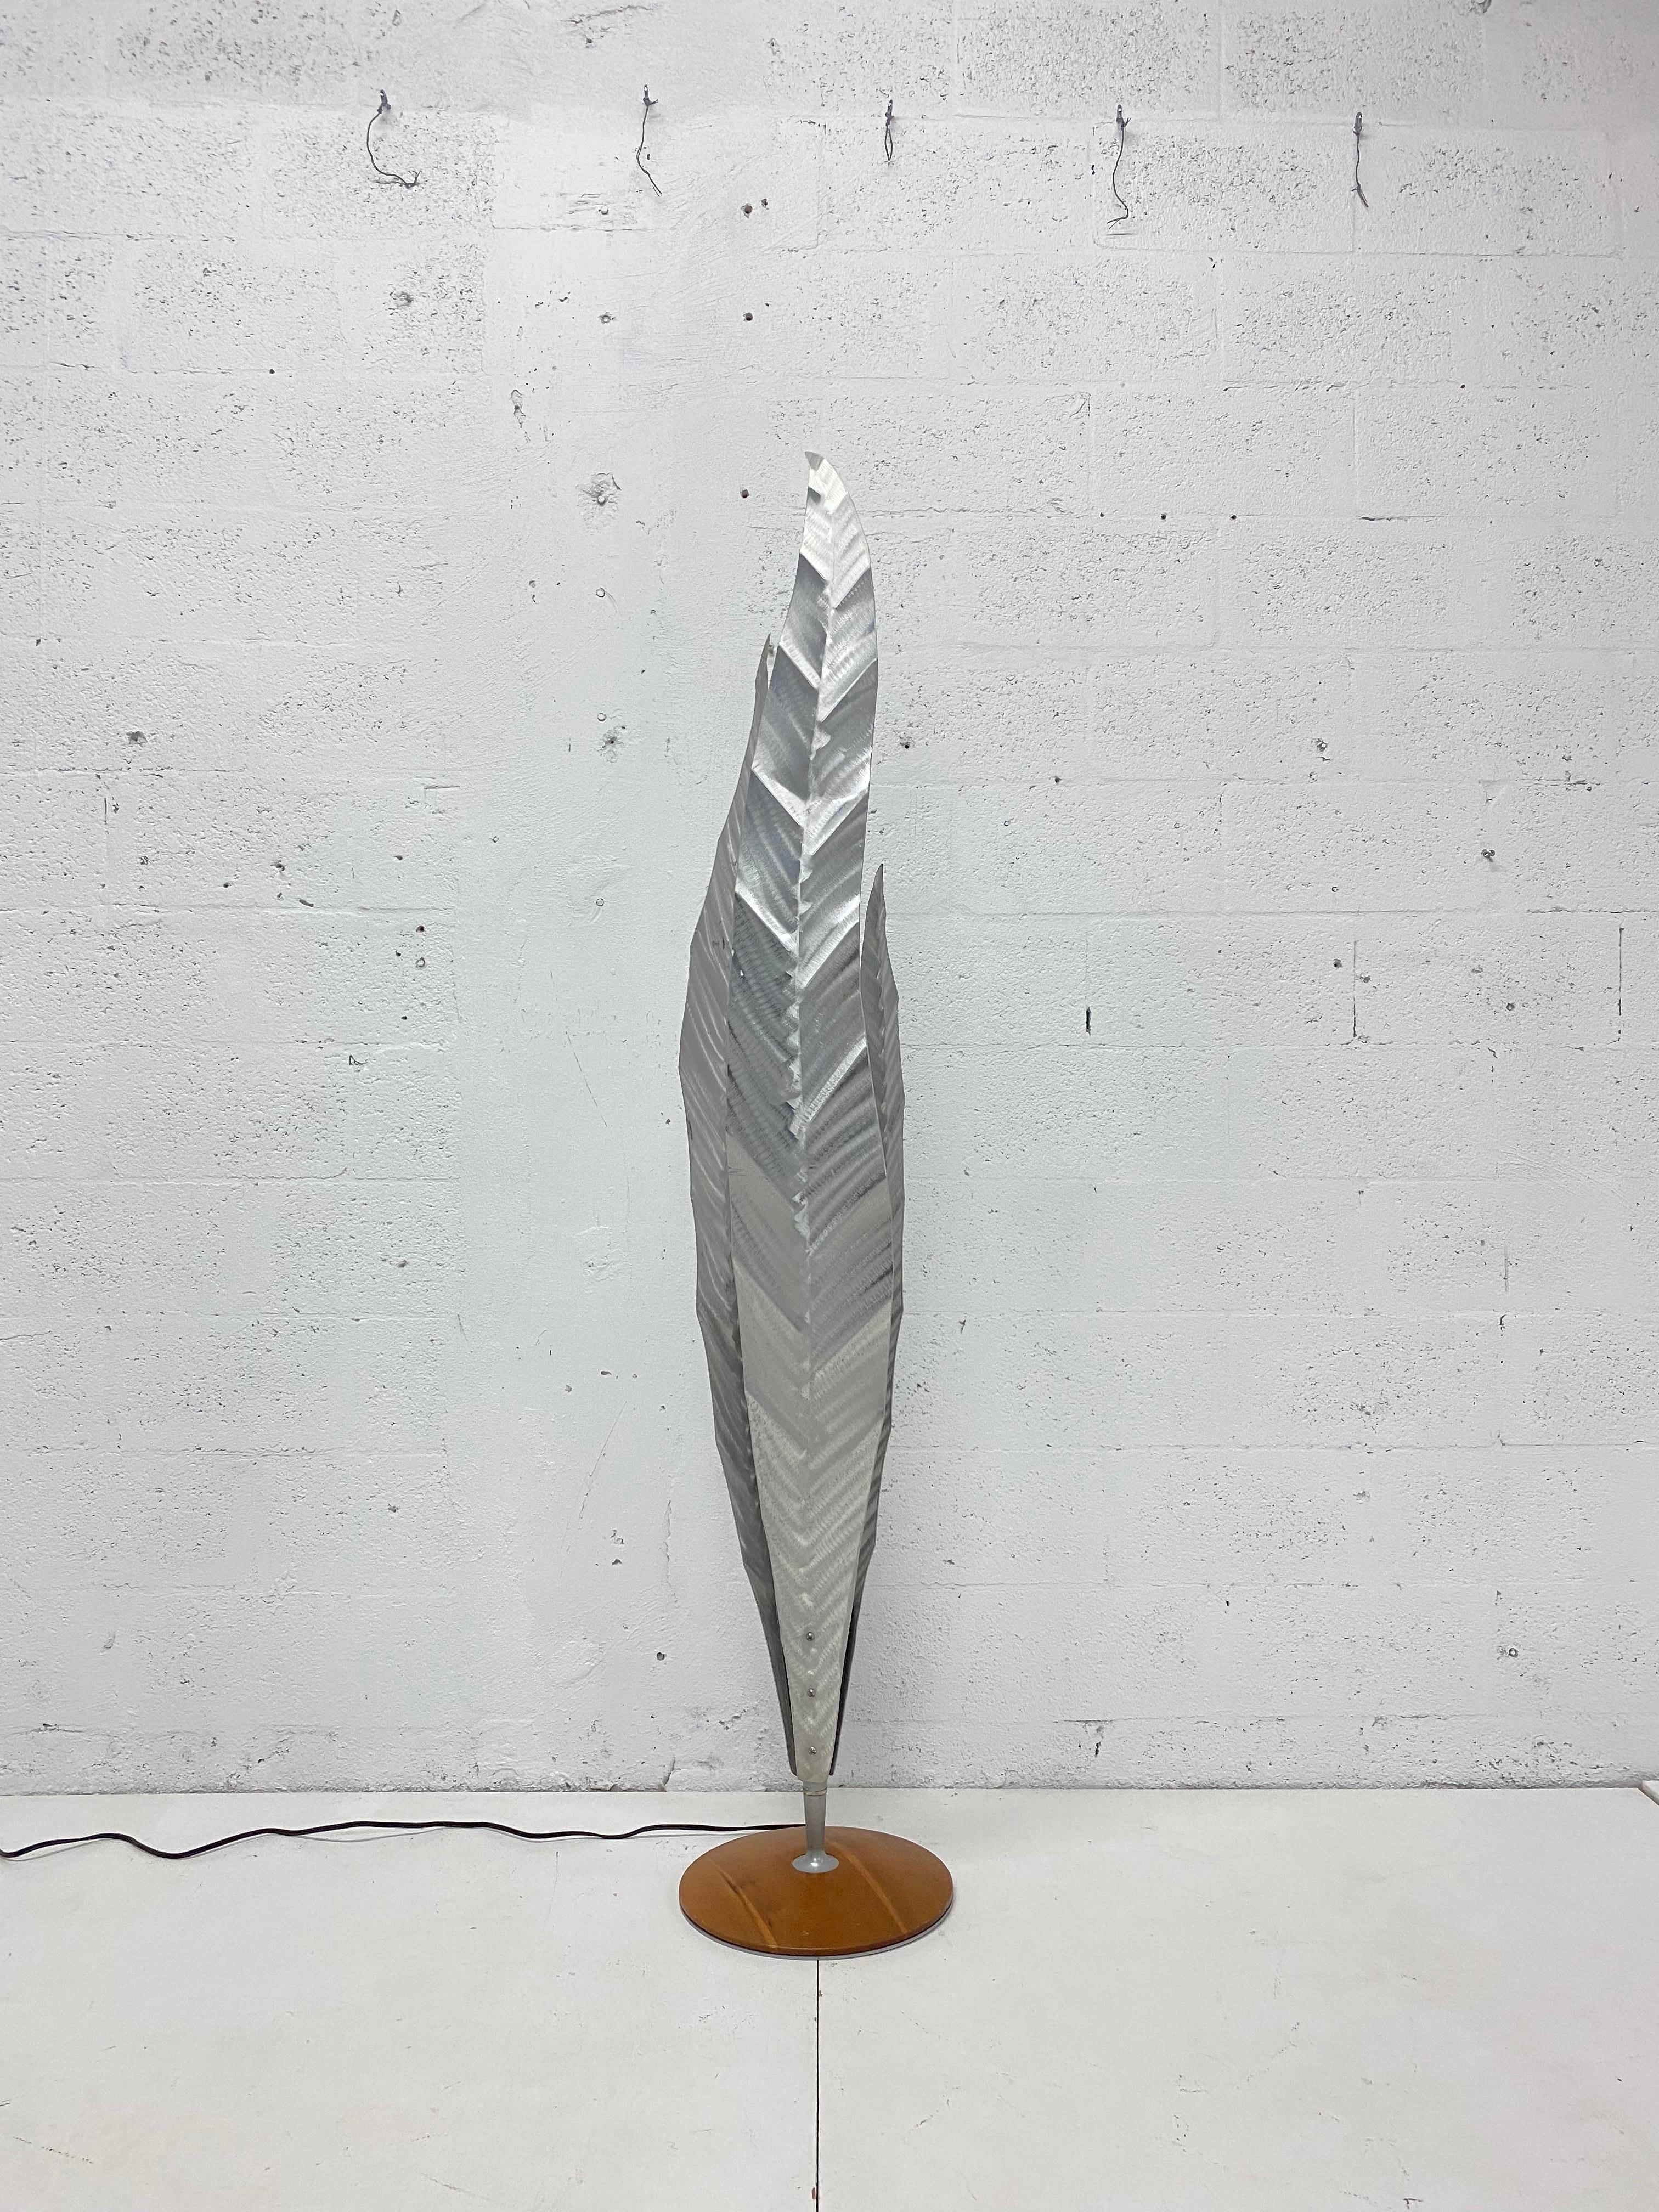 Hand crafted aluminum floor lamp with three vertical aluminum leaves welded to a steel rod and attached to a wood base. The E27 lamp is internal and can use up to a 100W bulb. The Aloe Piantana lamp was designed by Franco Zavarise for Zava Luce